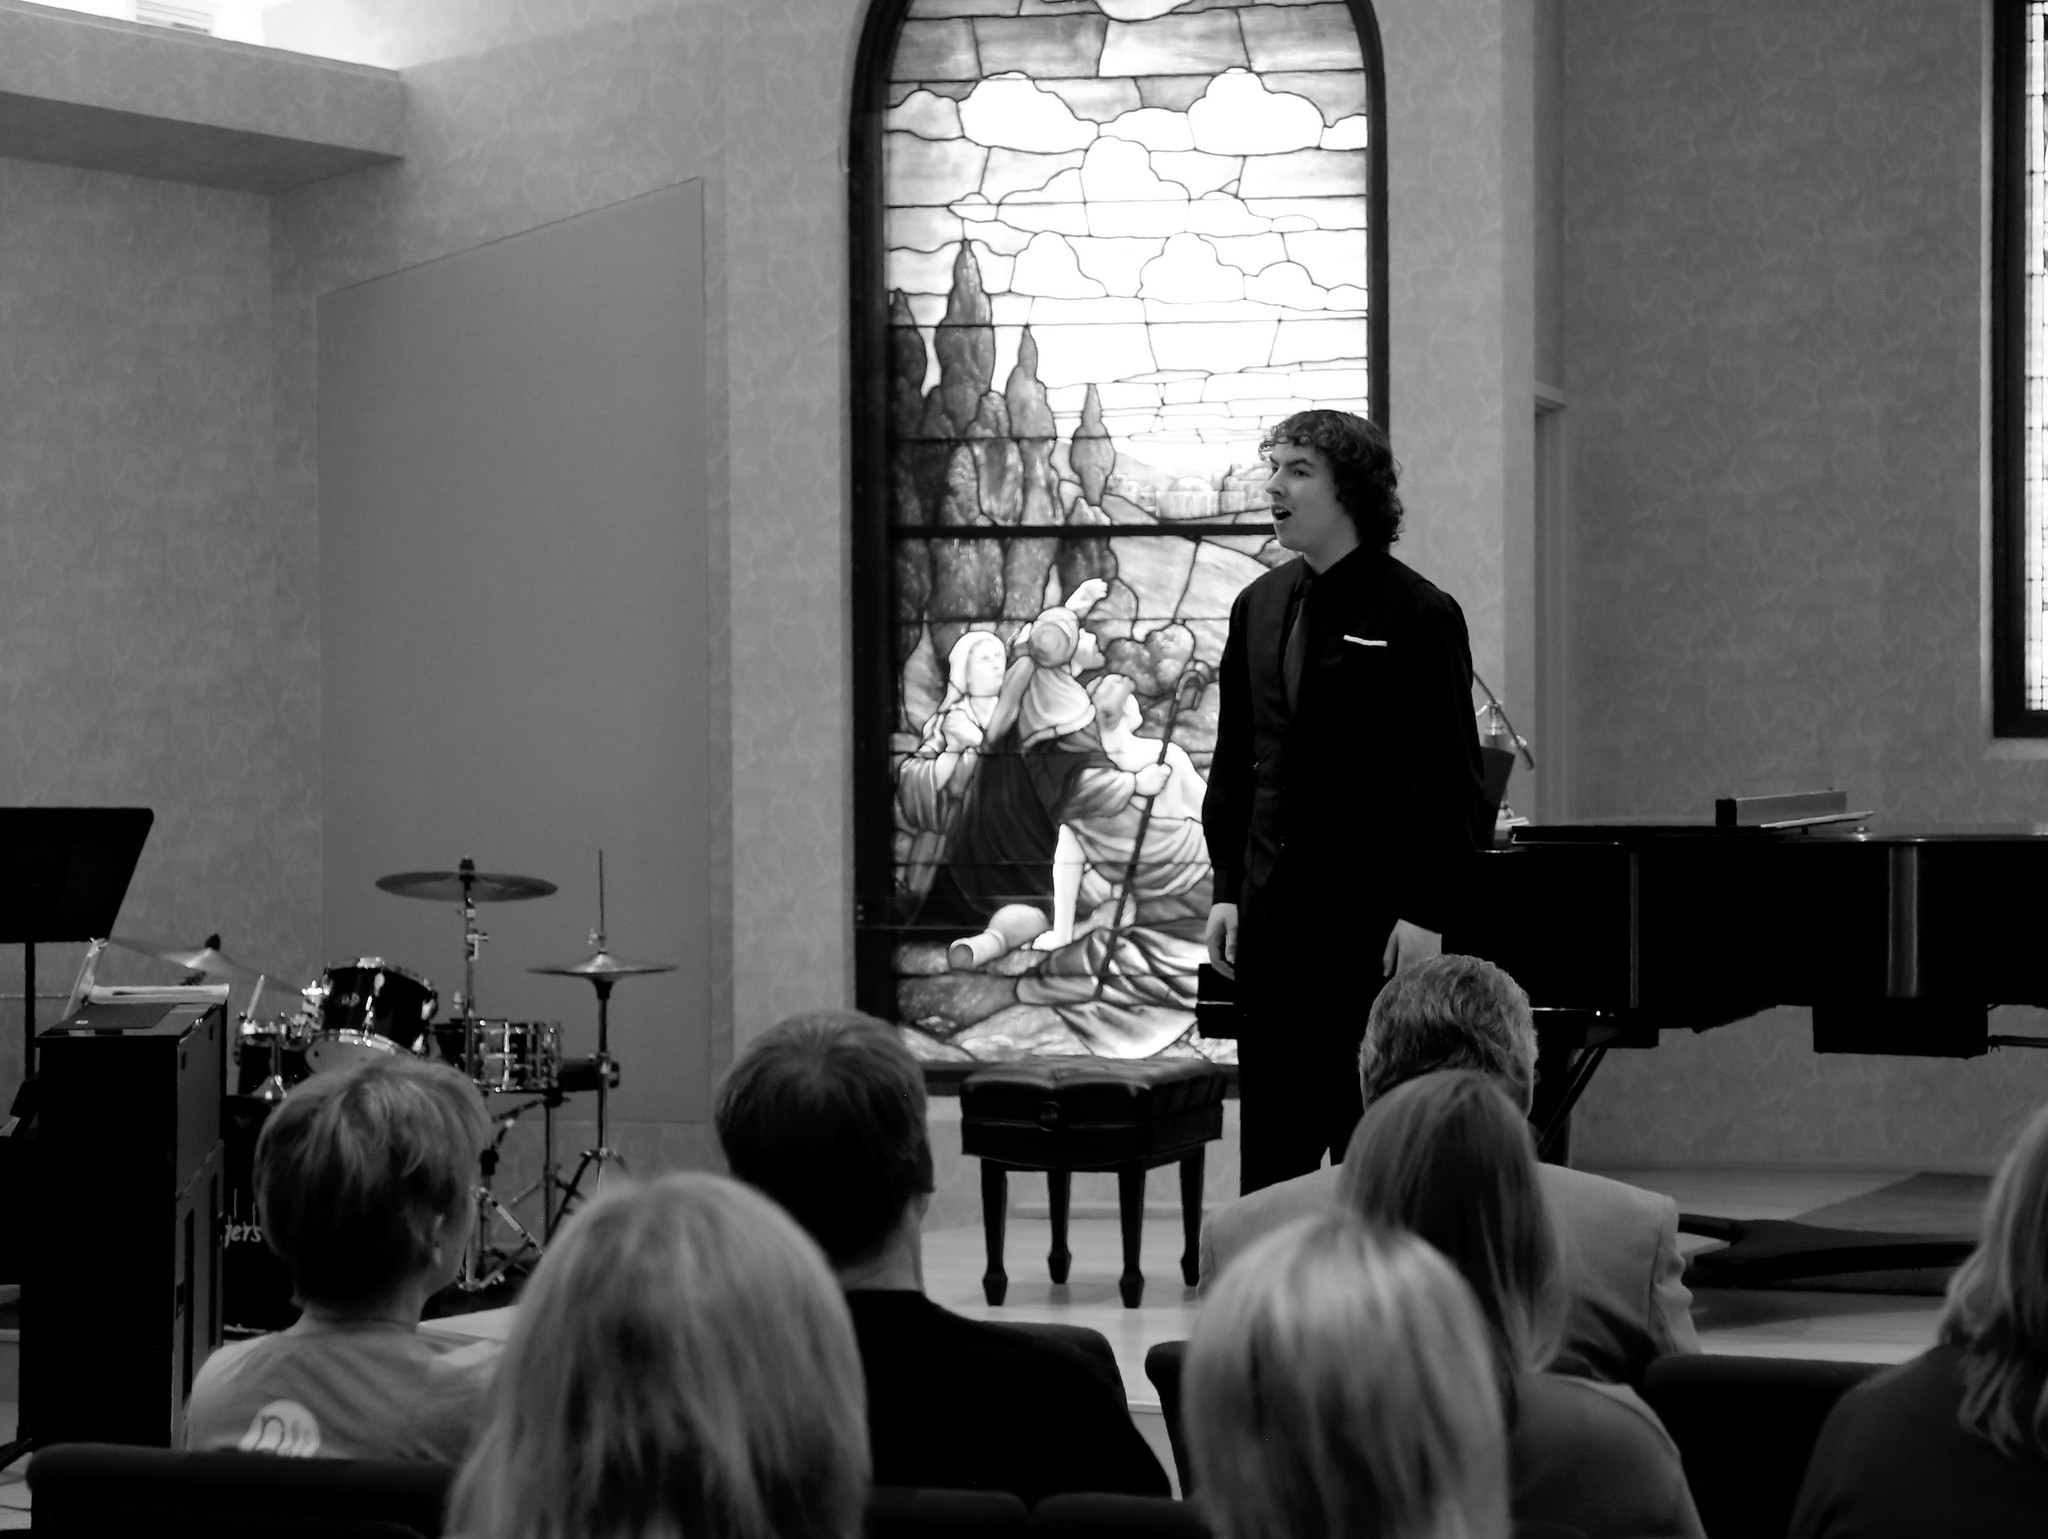 A male student sings at a recital.